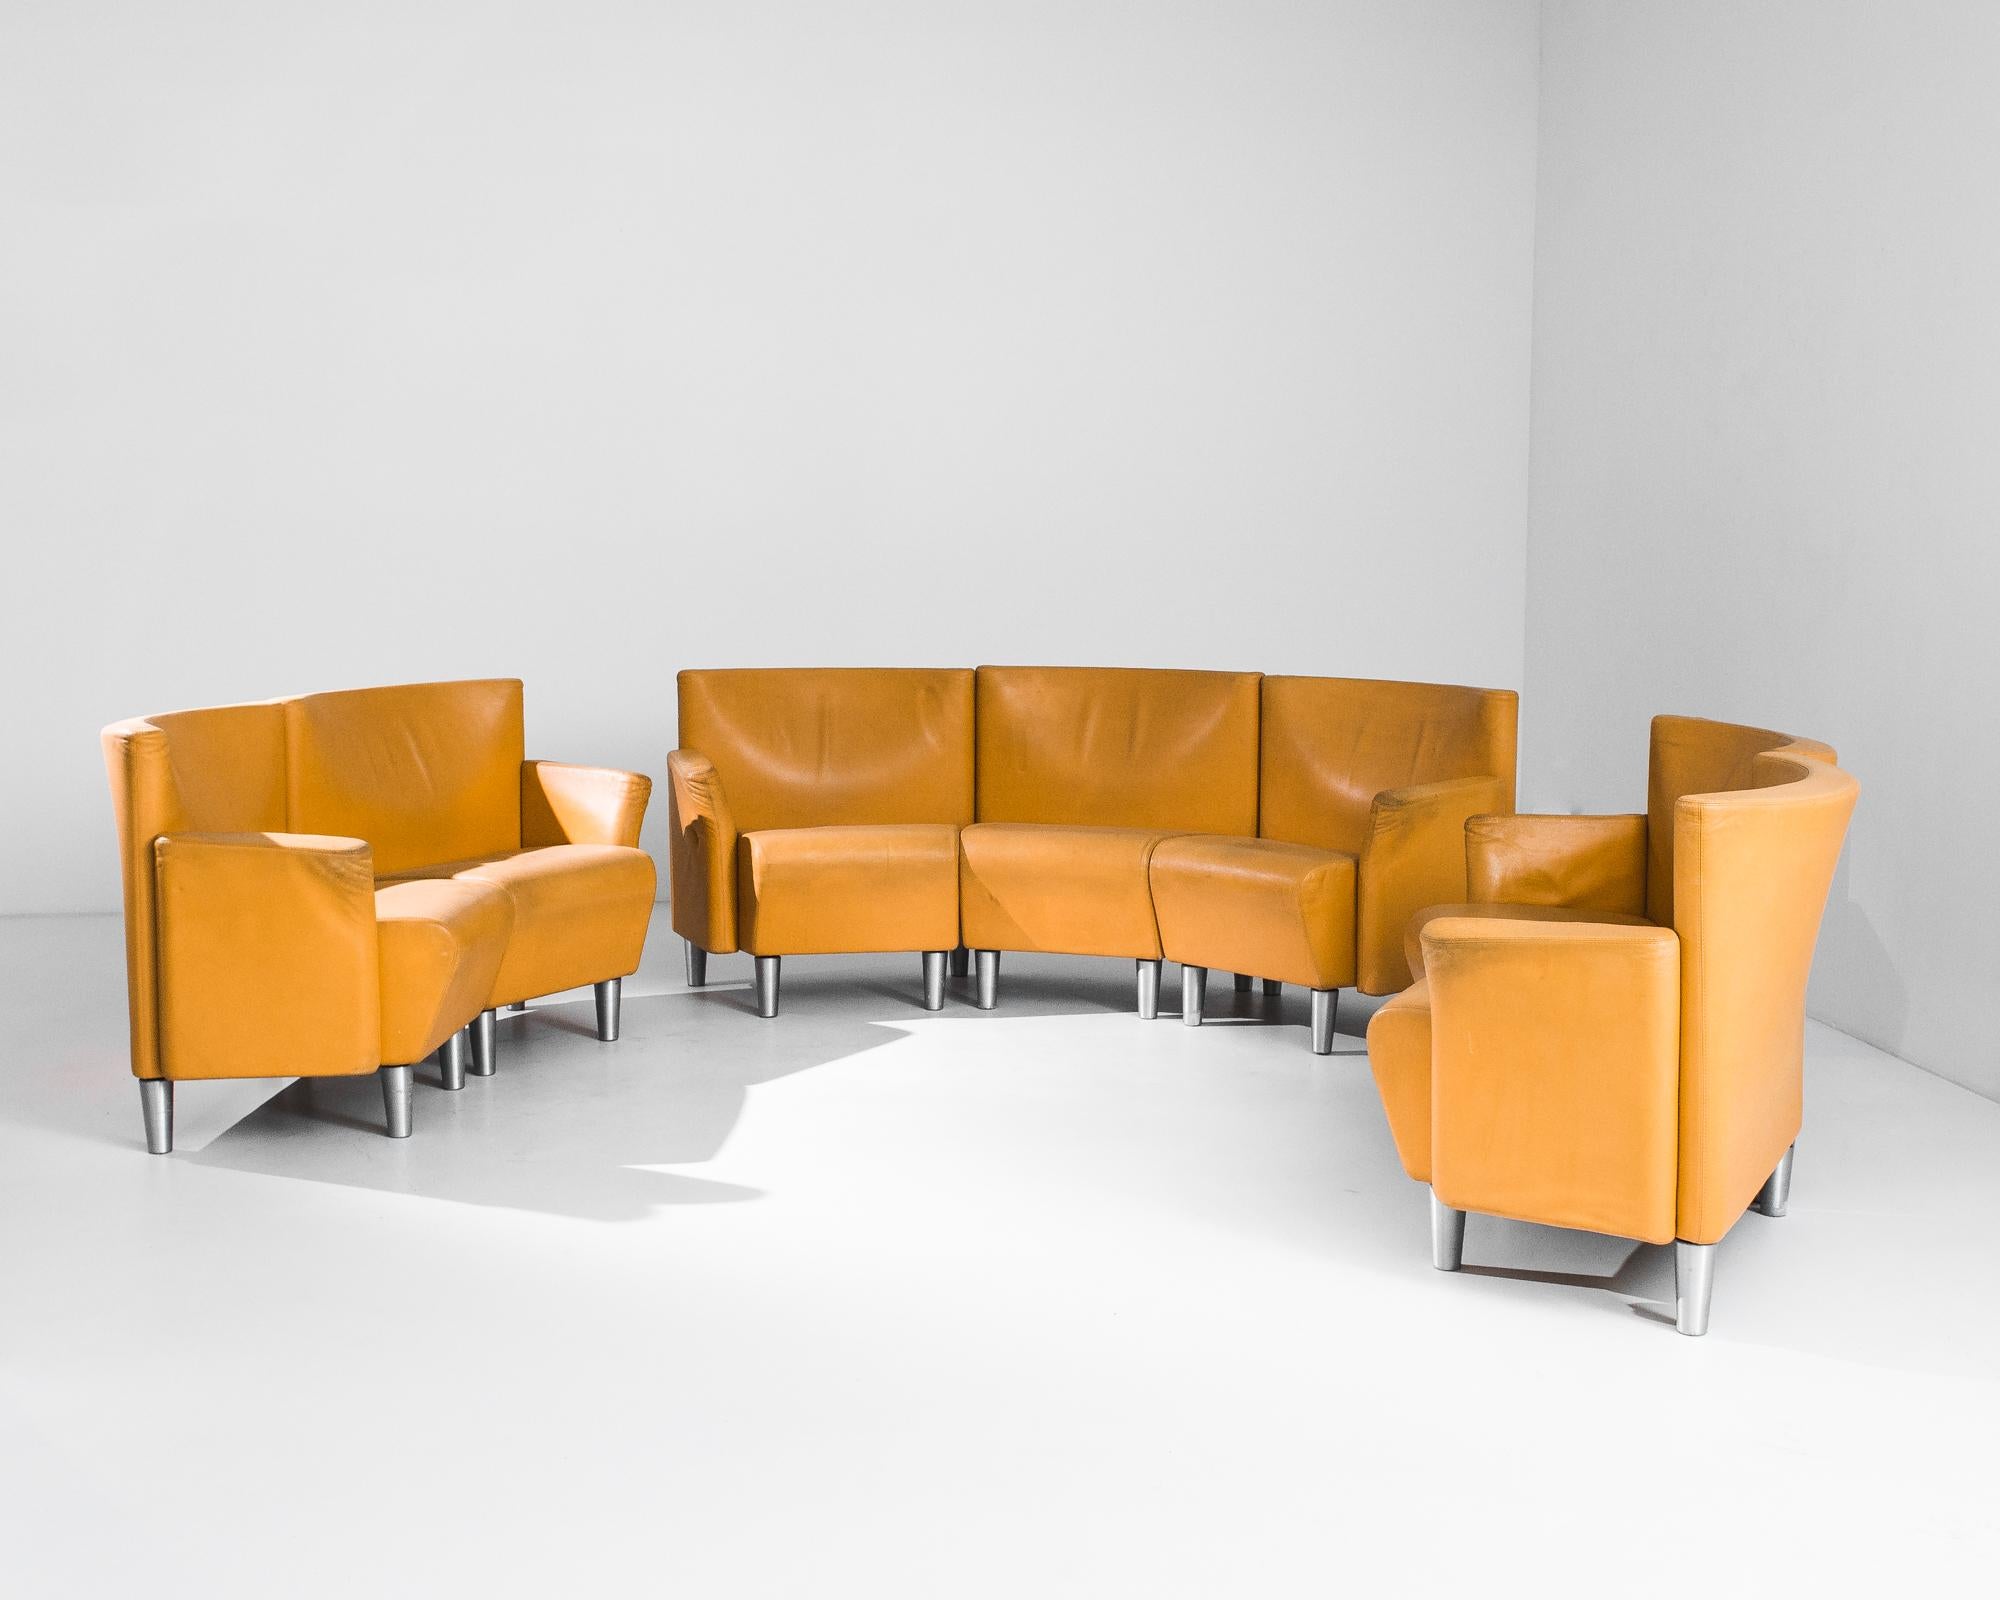 A 1970s three piece sofa set by Danish furniture manufacturer Eric Jorgensen, composed of a three-seater sofa, a love-seat and an armchair. Mustard-orange leather gives a rich pop of color, while conical silver metal feet give a retro-futuristic